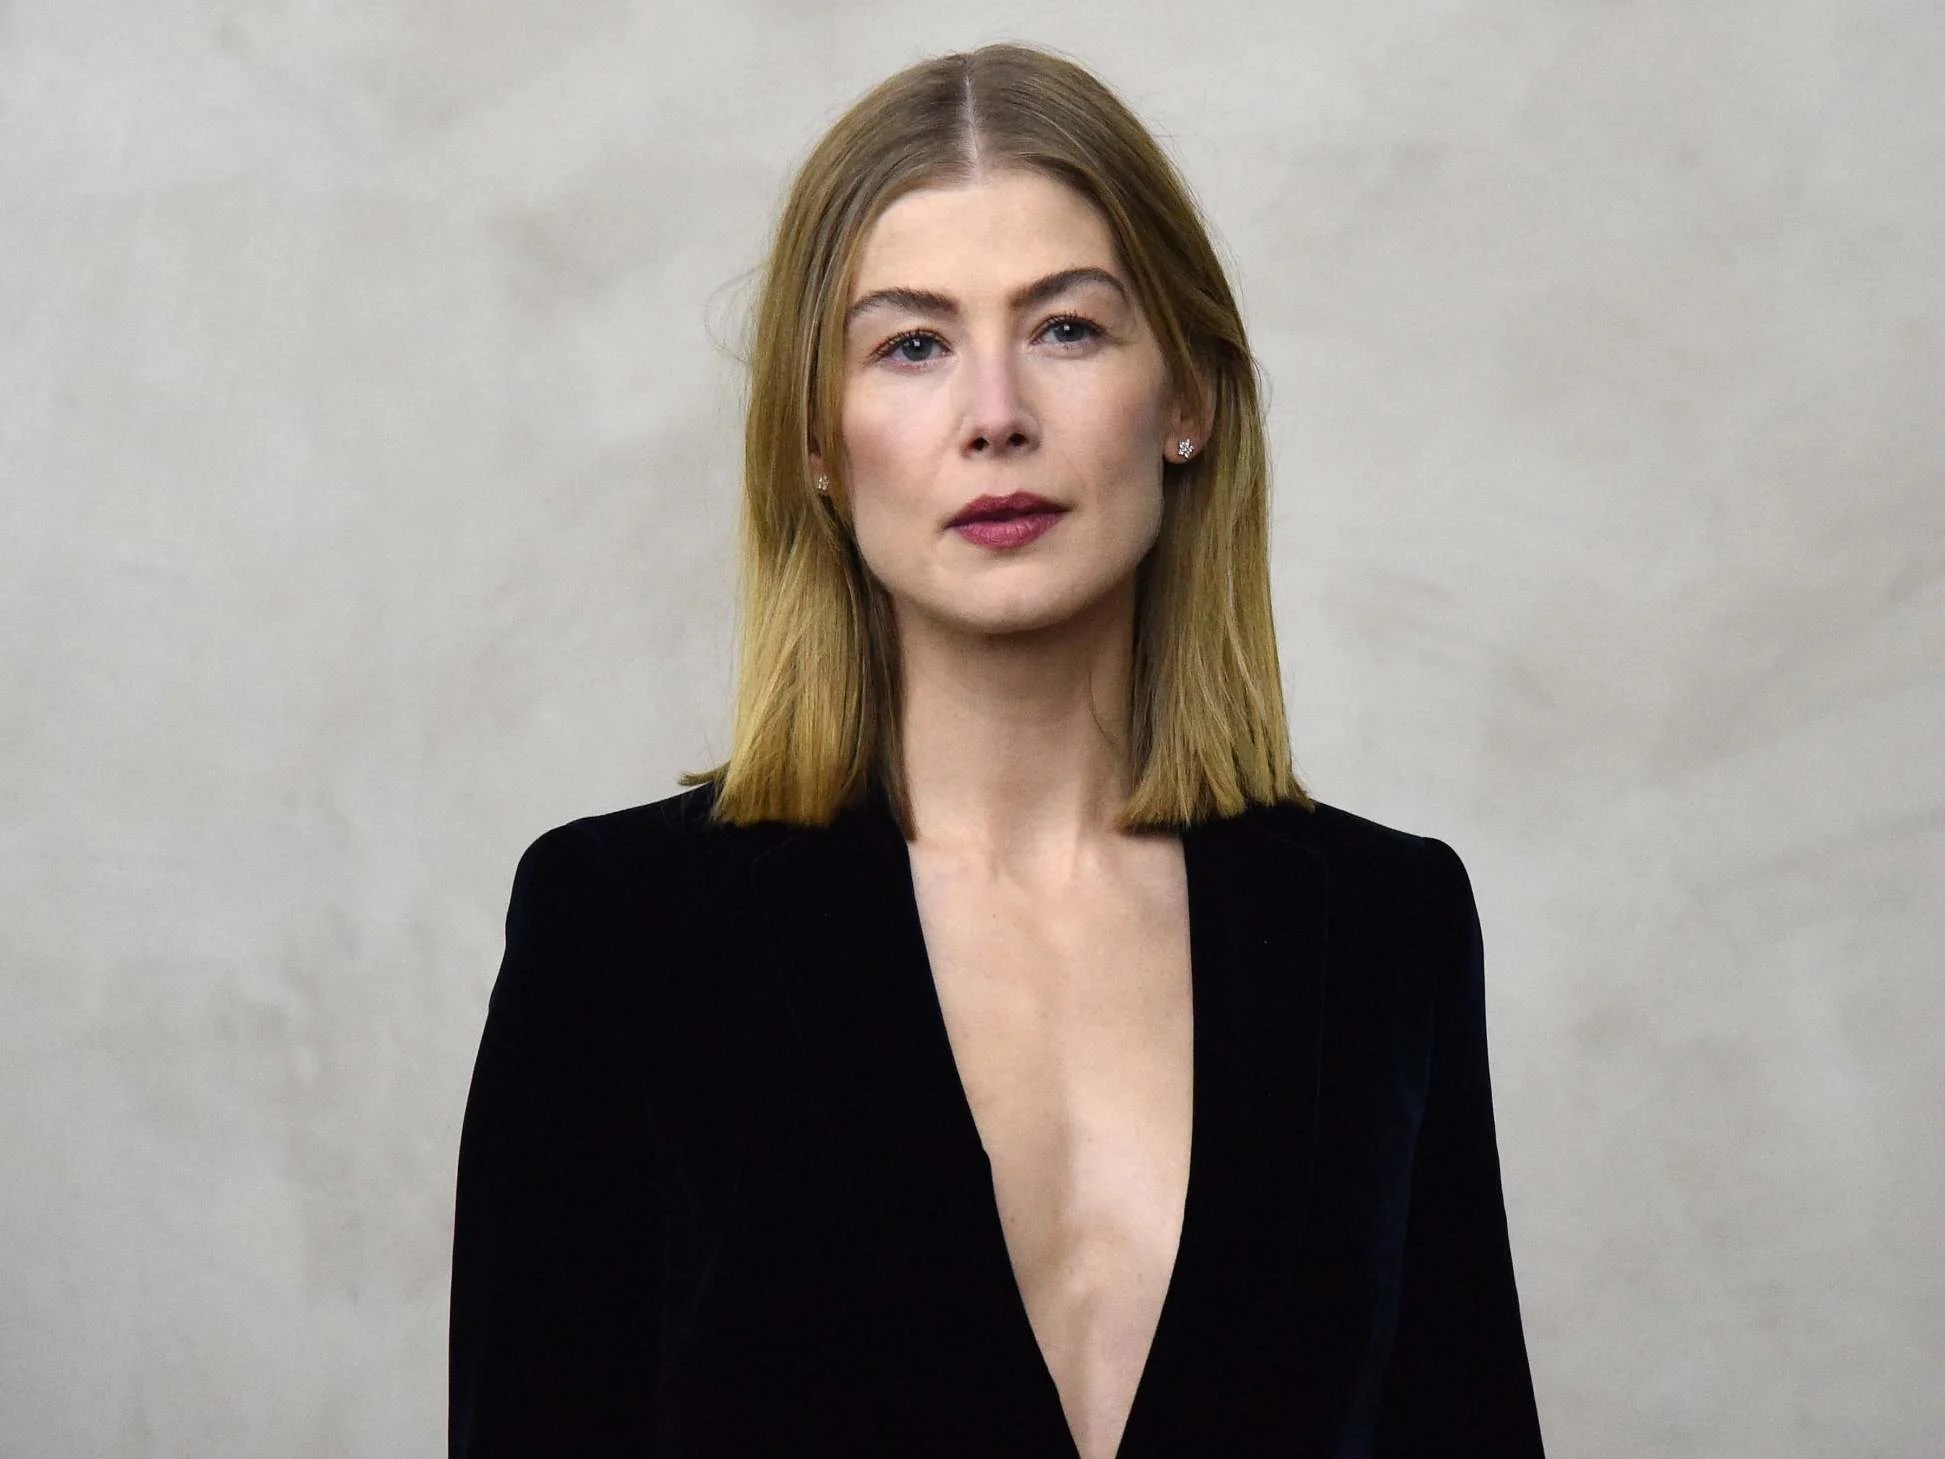 Rosamund Pike ‘How do you feel when someone calls you an English rose